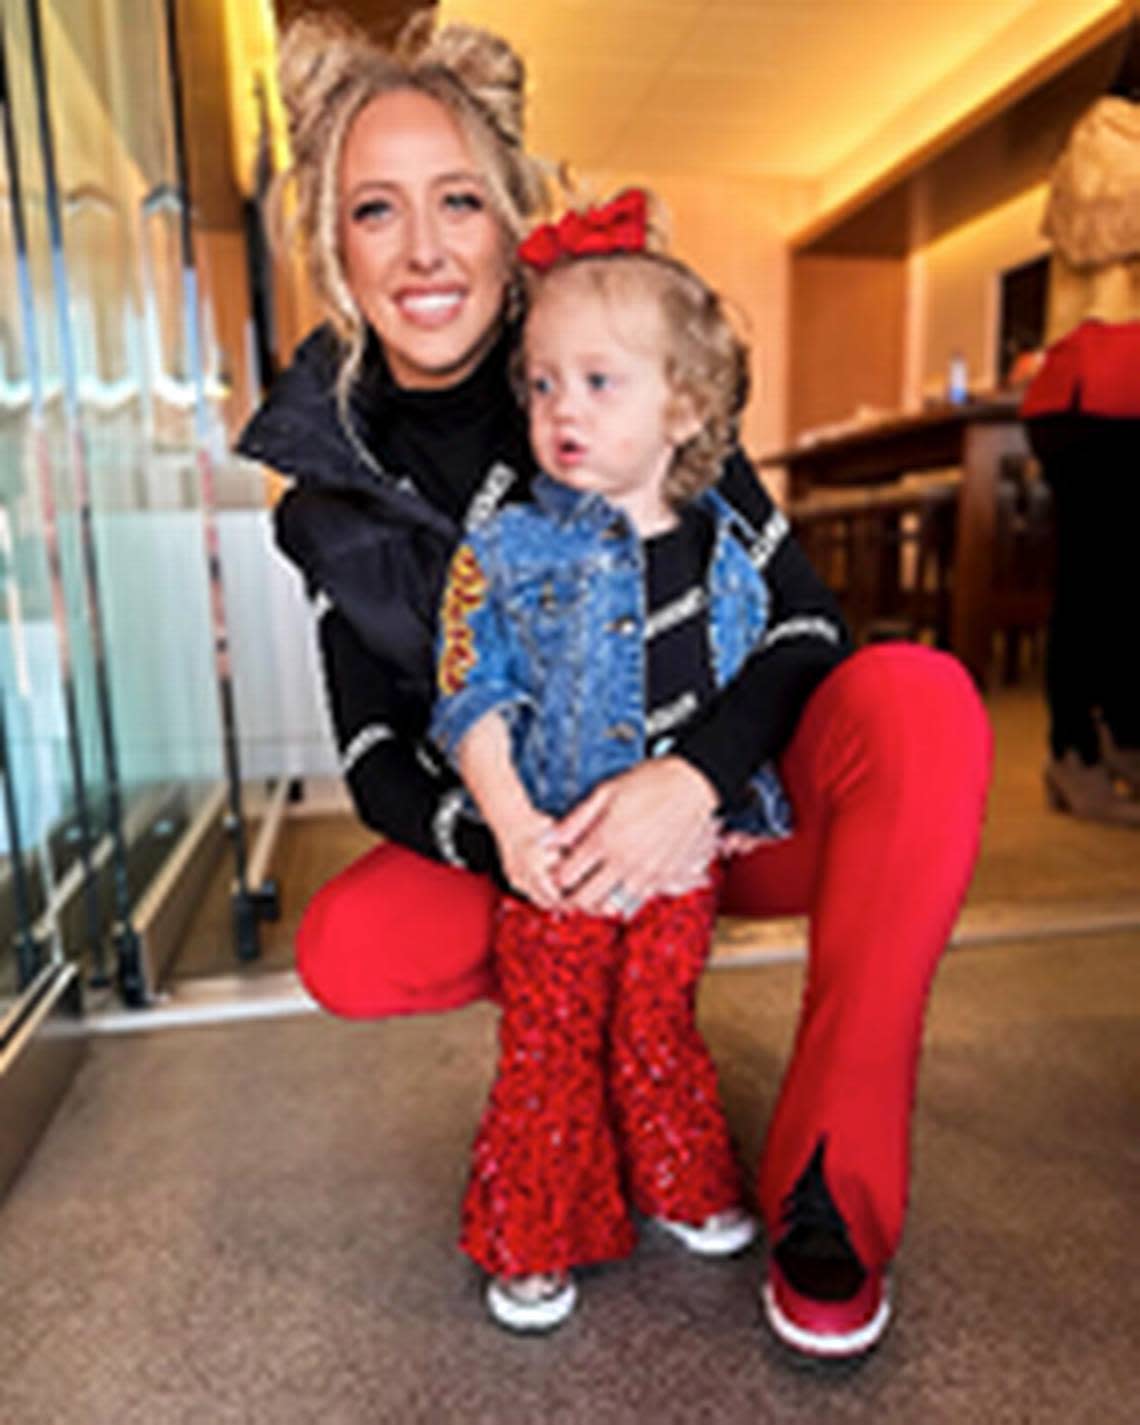 Celebrity magazines Us Weekly and People follow the comings and goings of the Mahomes family, including Brittany Mahomes and daughter, Sterling.